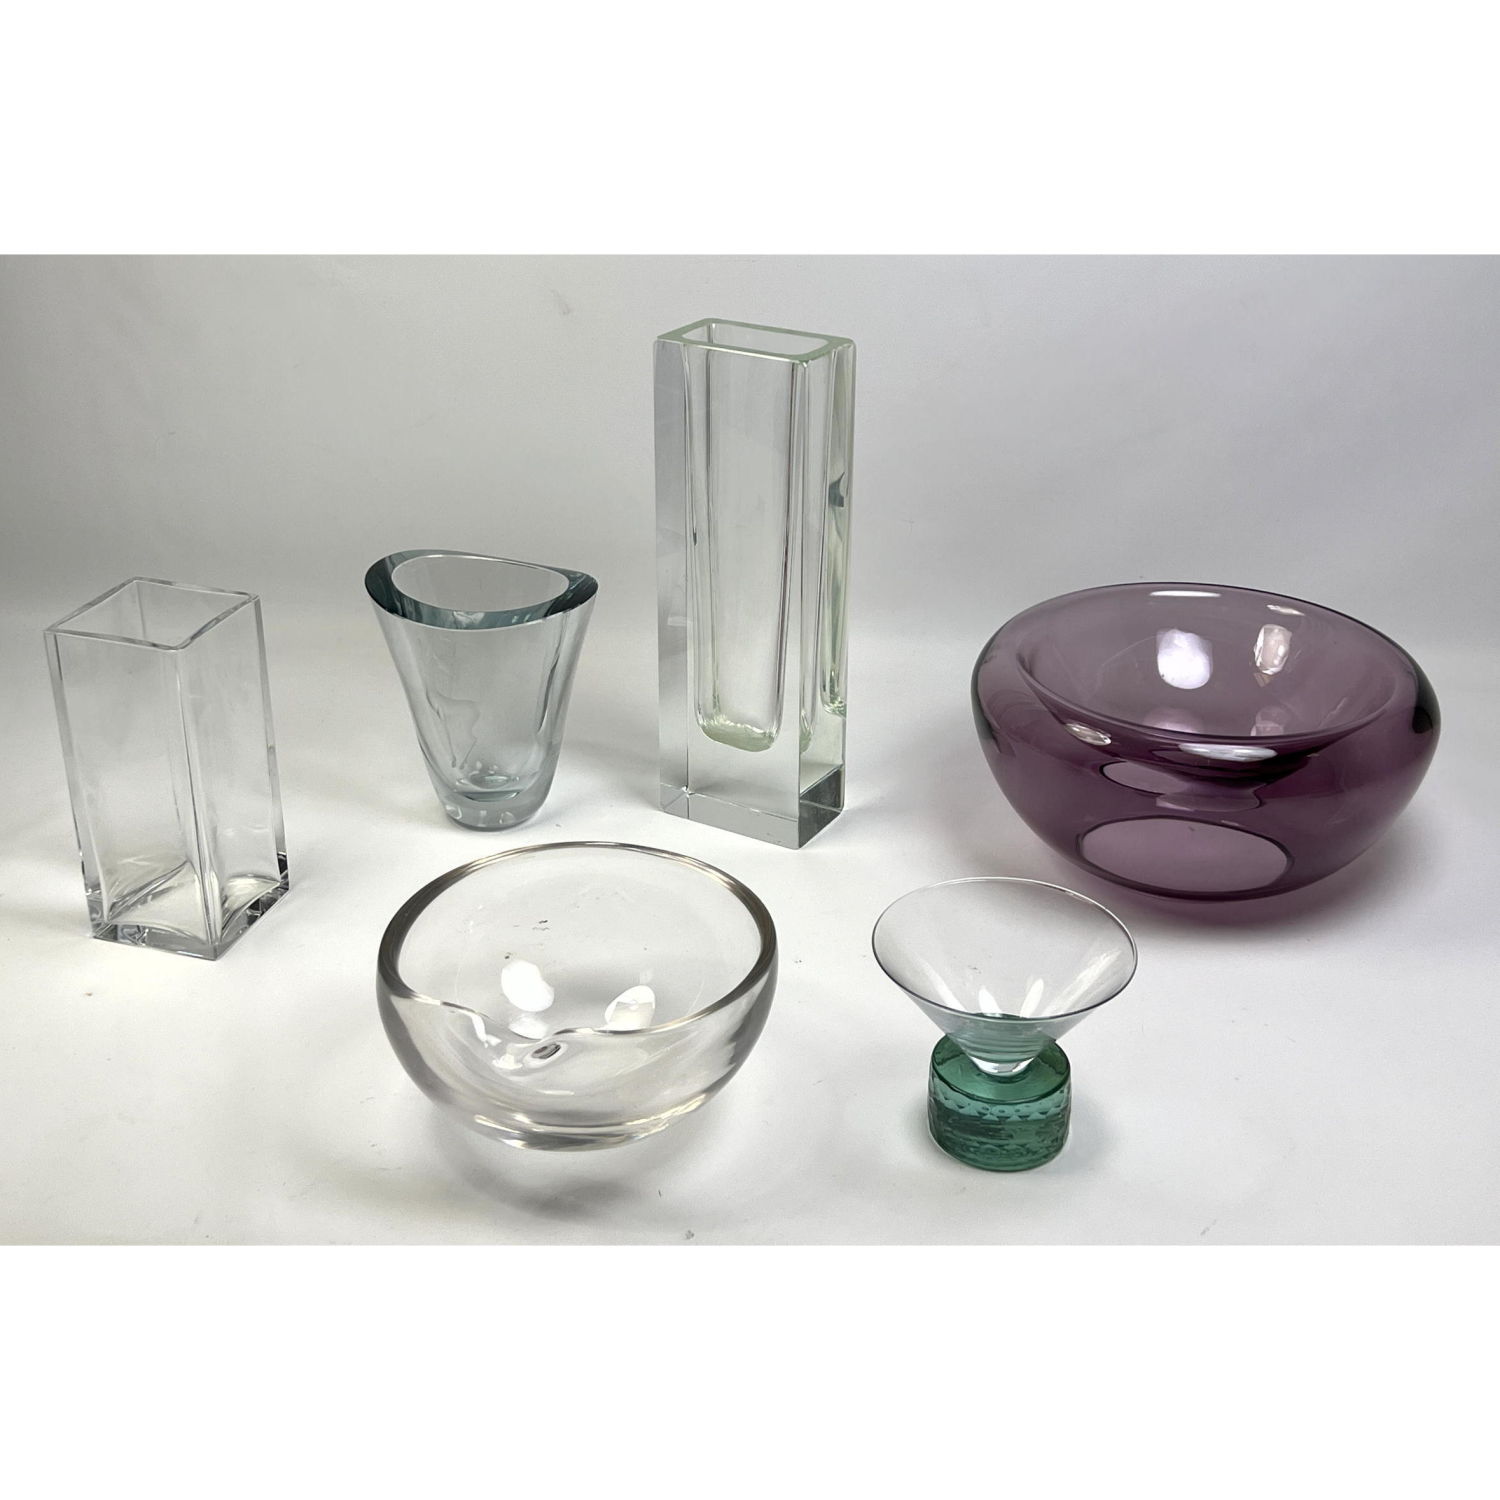 6pc Modern Design Glass Collection.